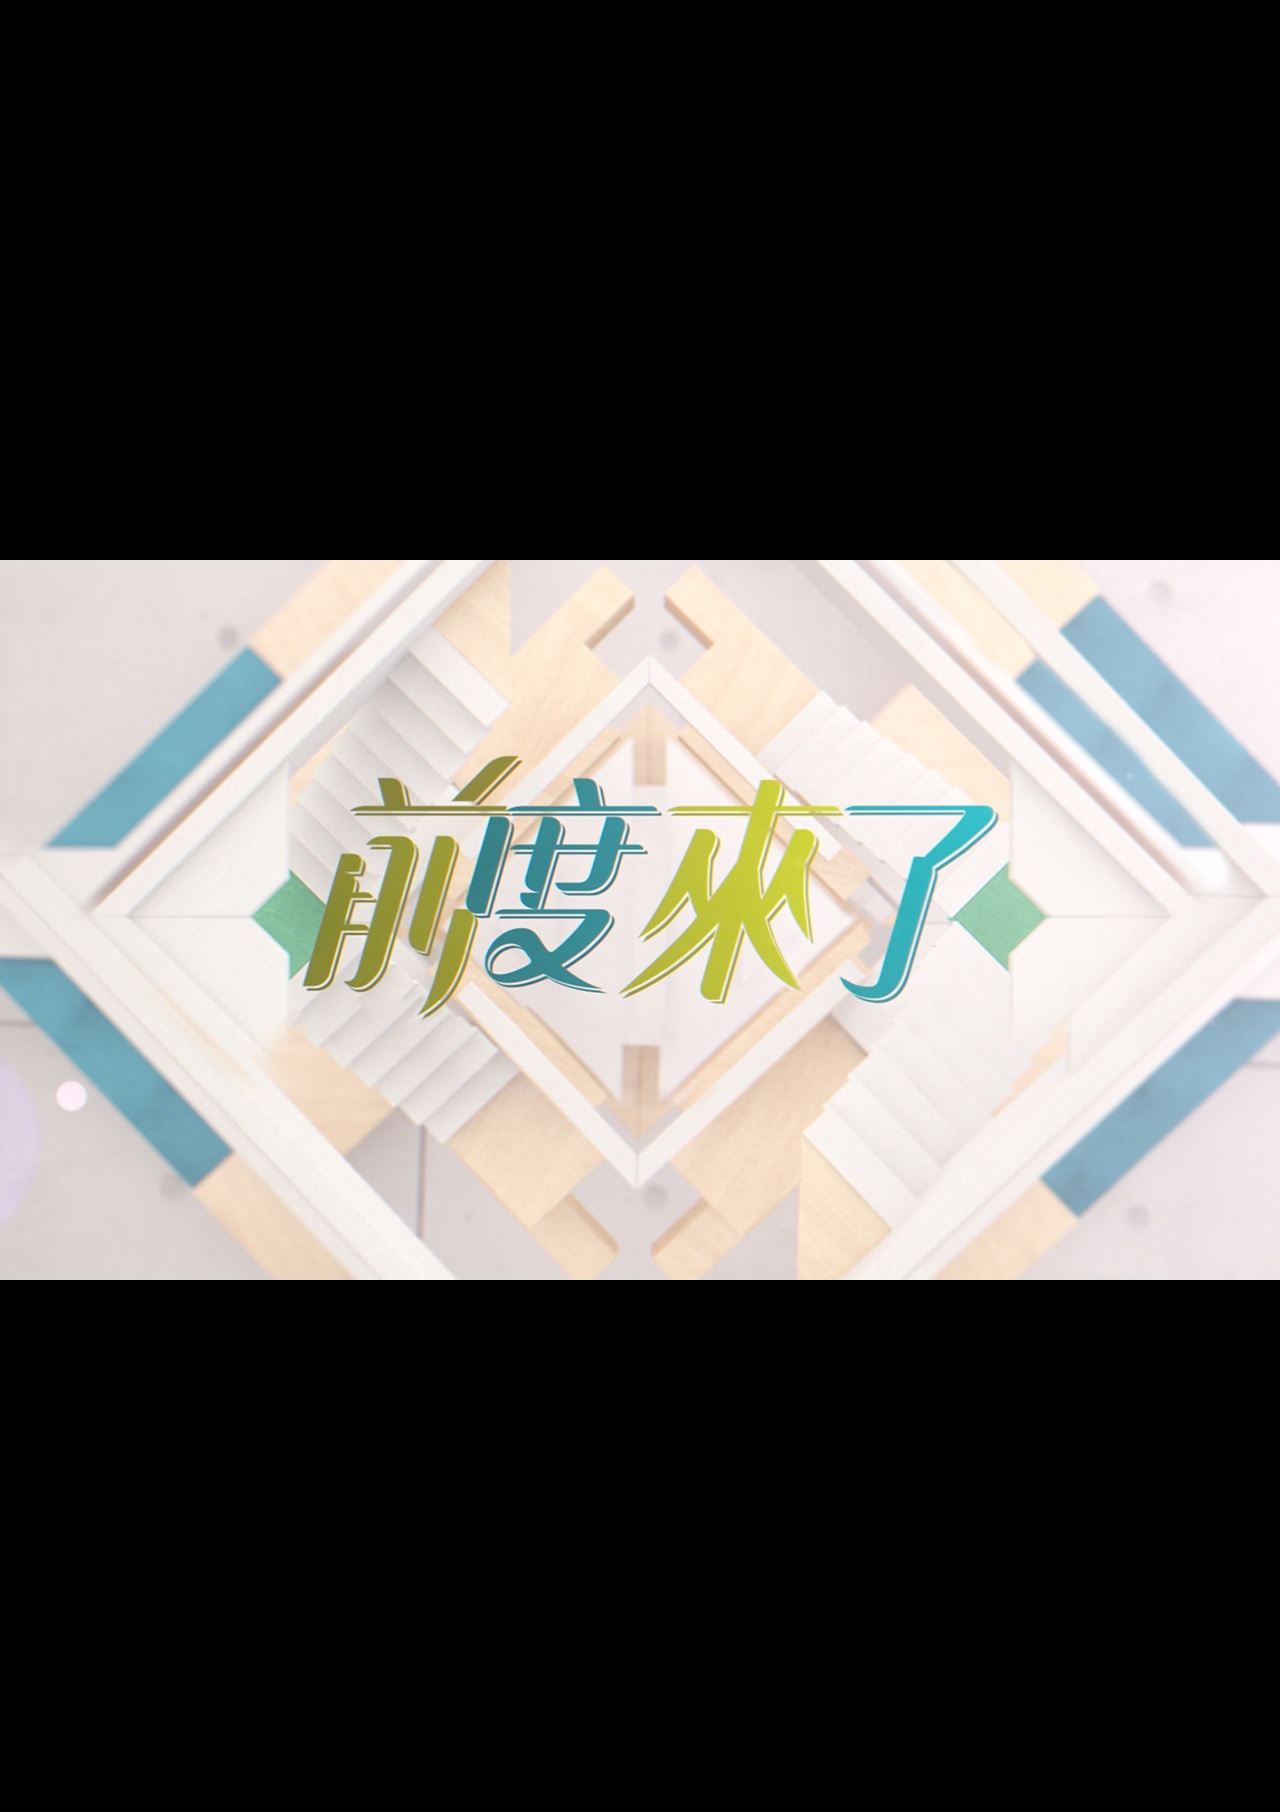 Ex is Coming - 前度來了